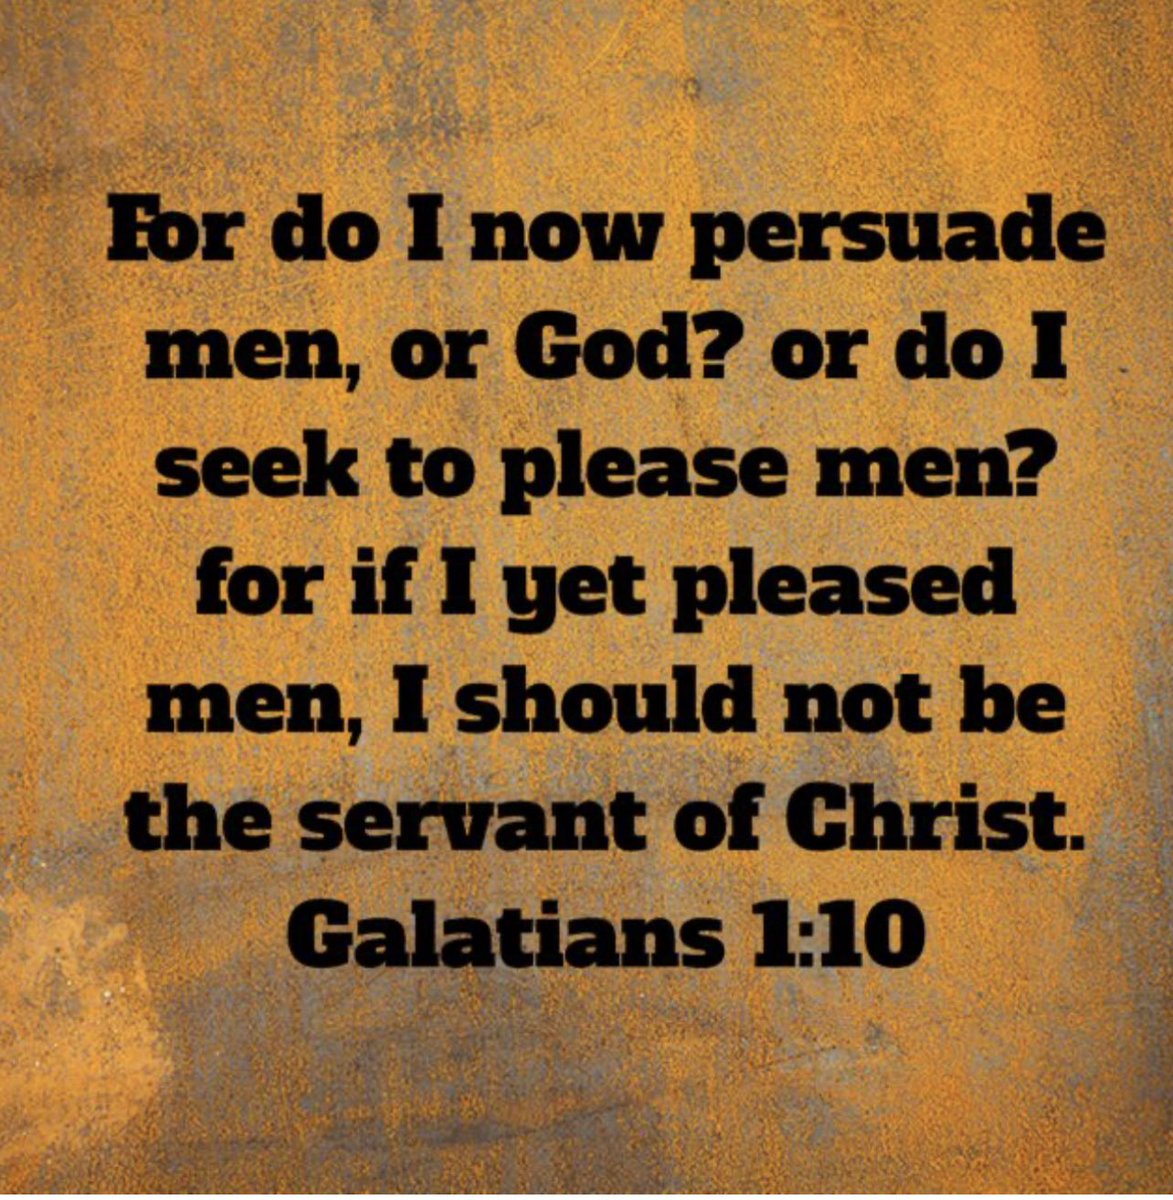 Galatians 1:10 KJV
For do I now persuade men, or God? or do I seek to please men? for if I yet pleased men, I should not be the servant of Christ.
Apostle Paul-
#TruthMatters 
#JesusIsLord
#Believe